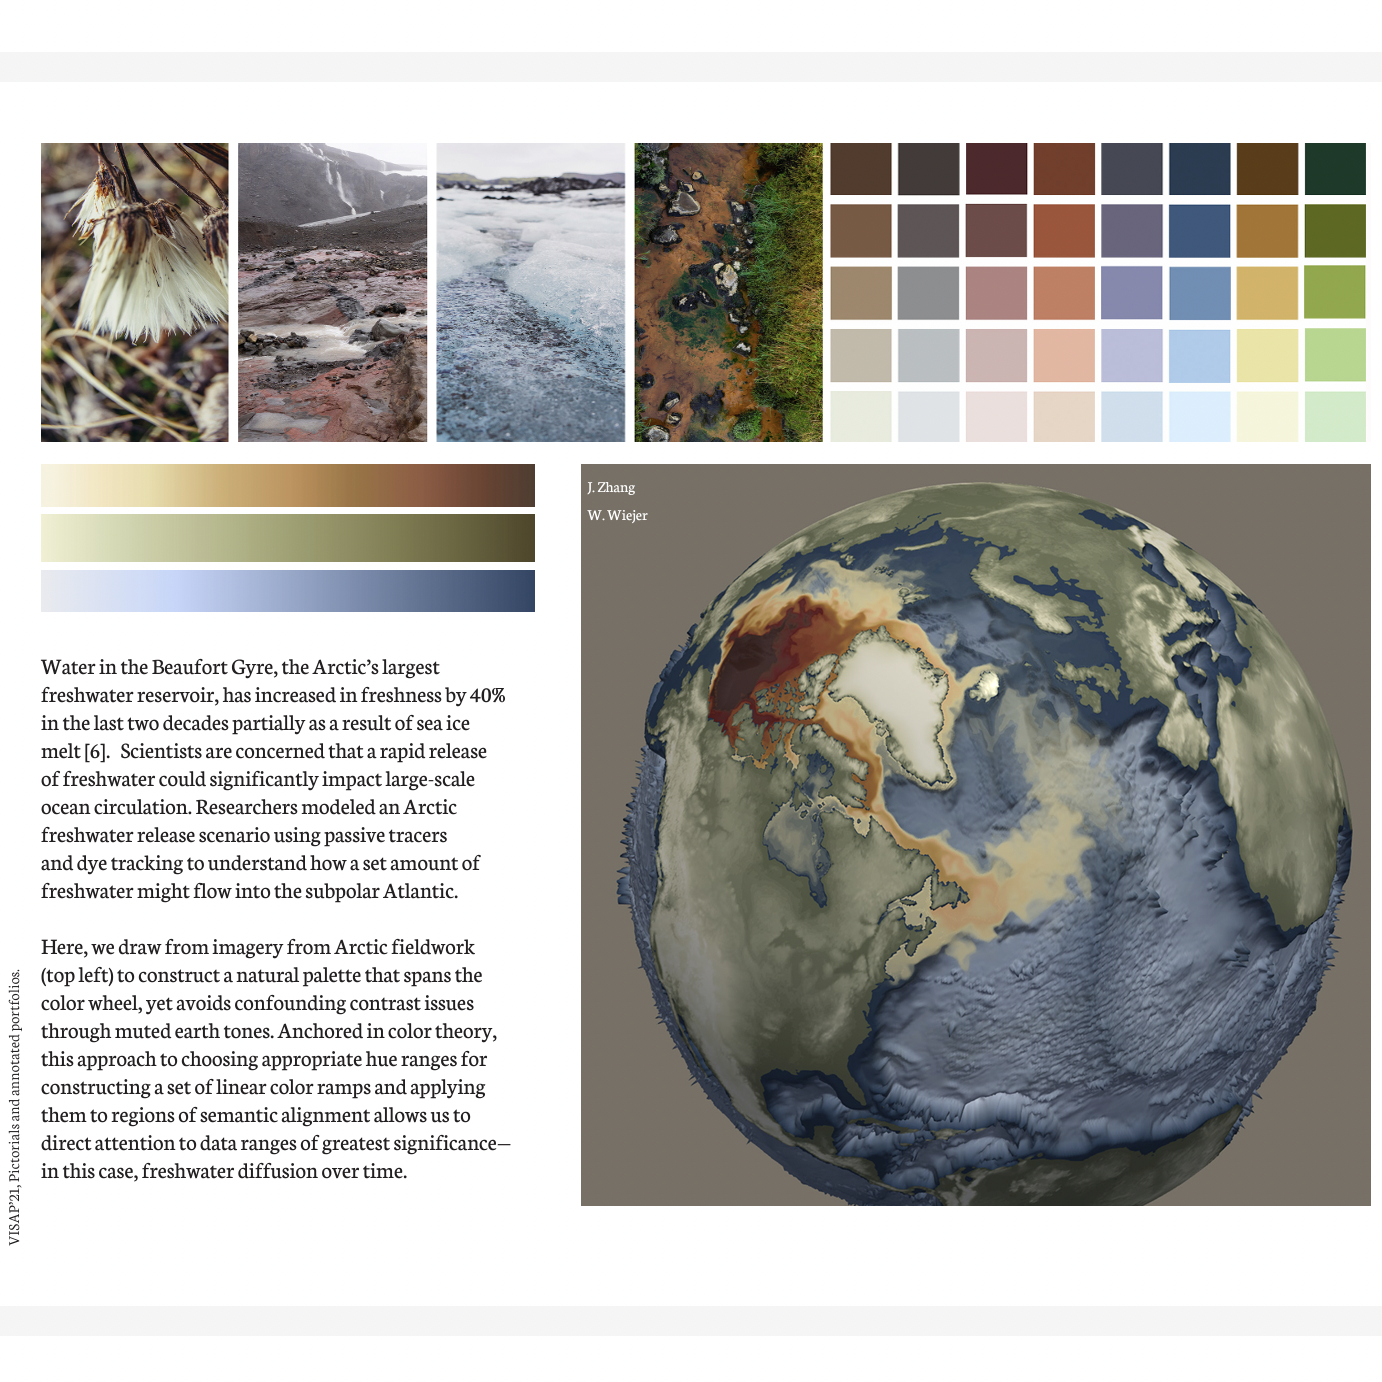 Teaser image for Affective Palettes for Scientific Visualization: Grounding Environmental Data in the Natural World